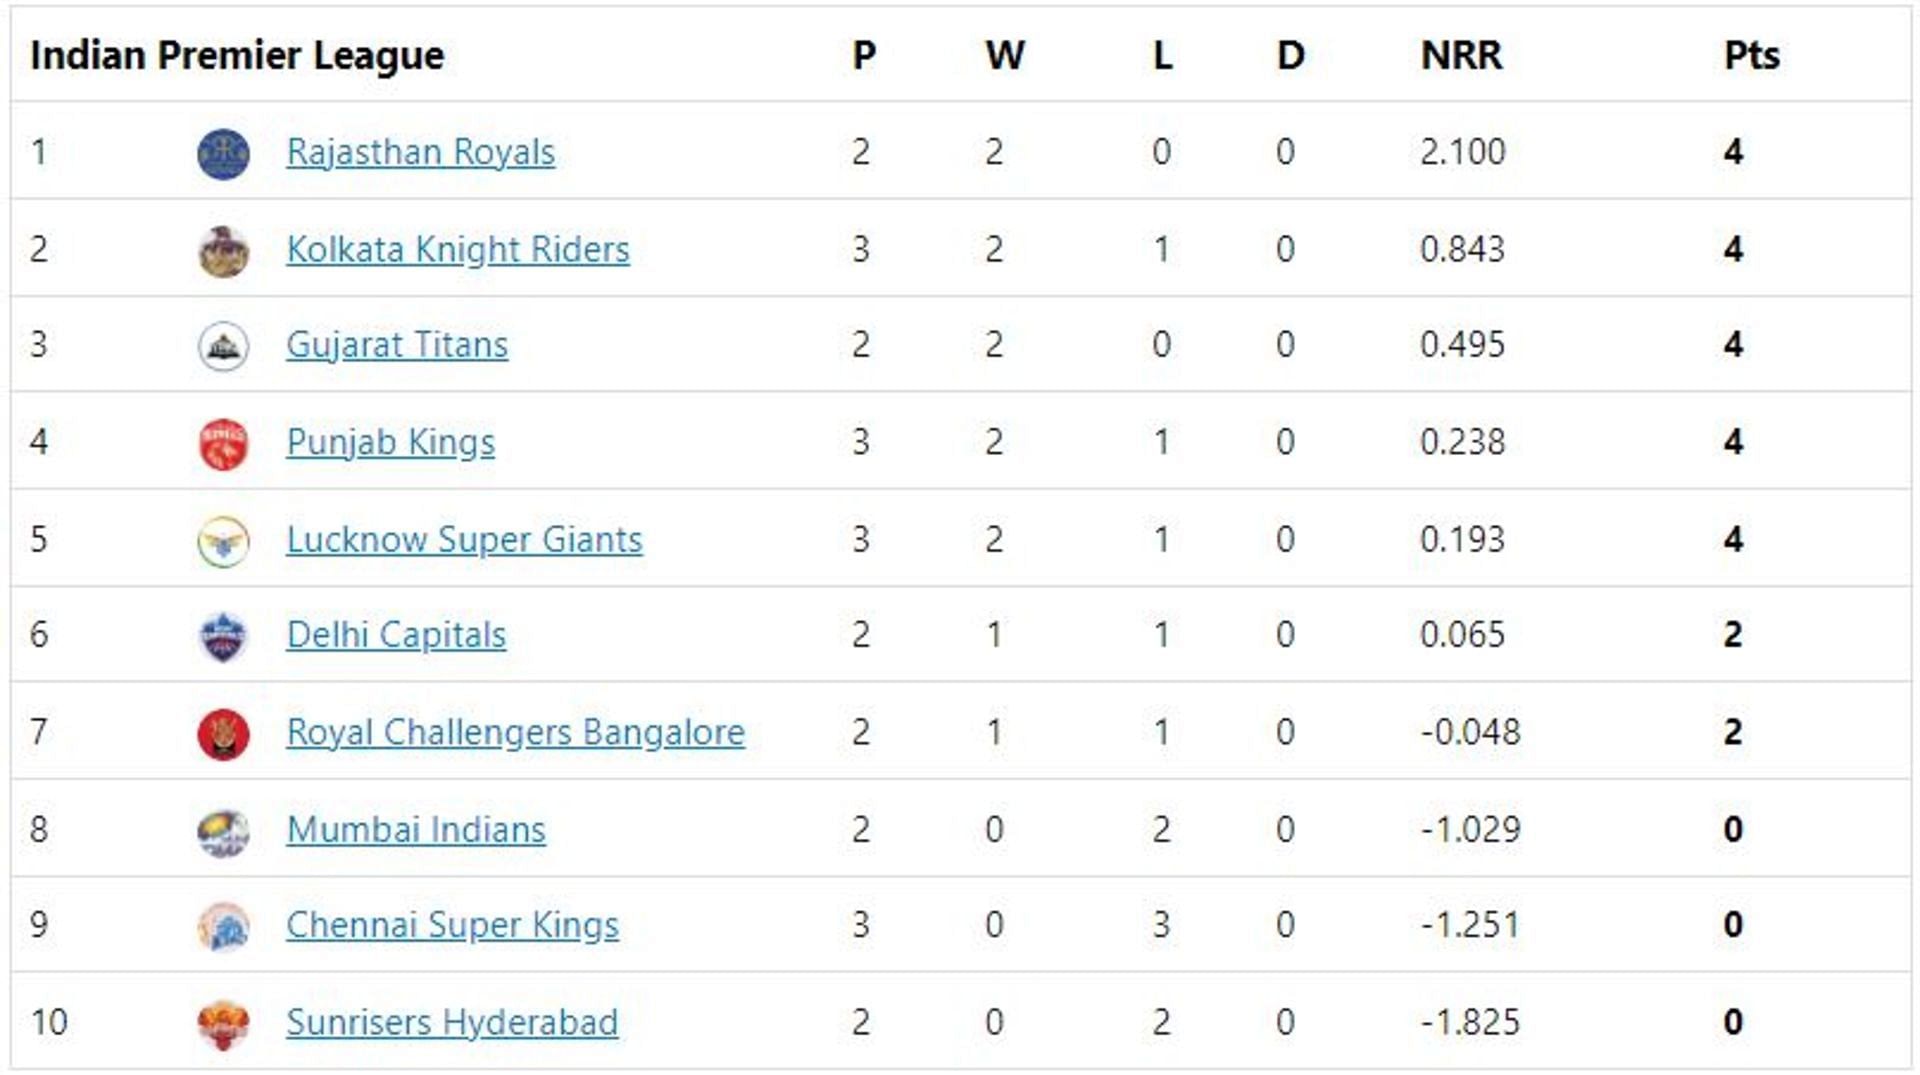 LSG moves into the top half of the table with a win over SRH.